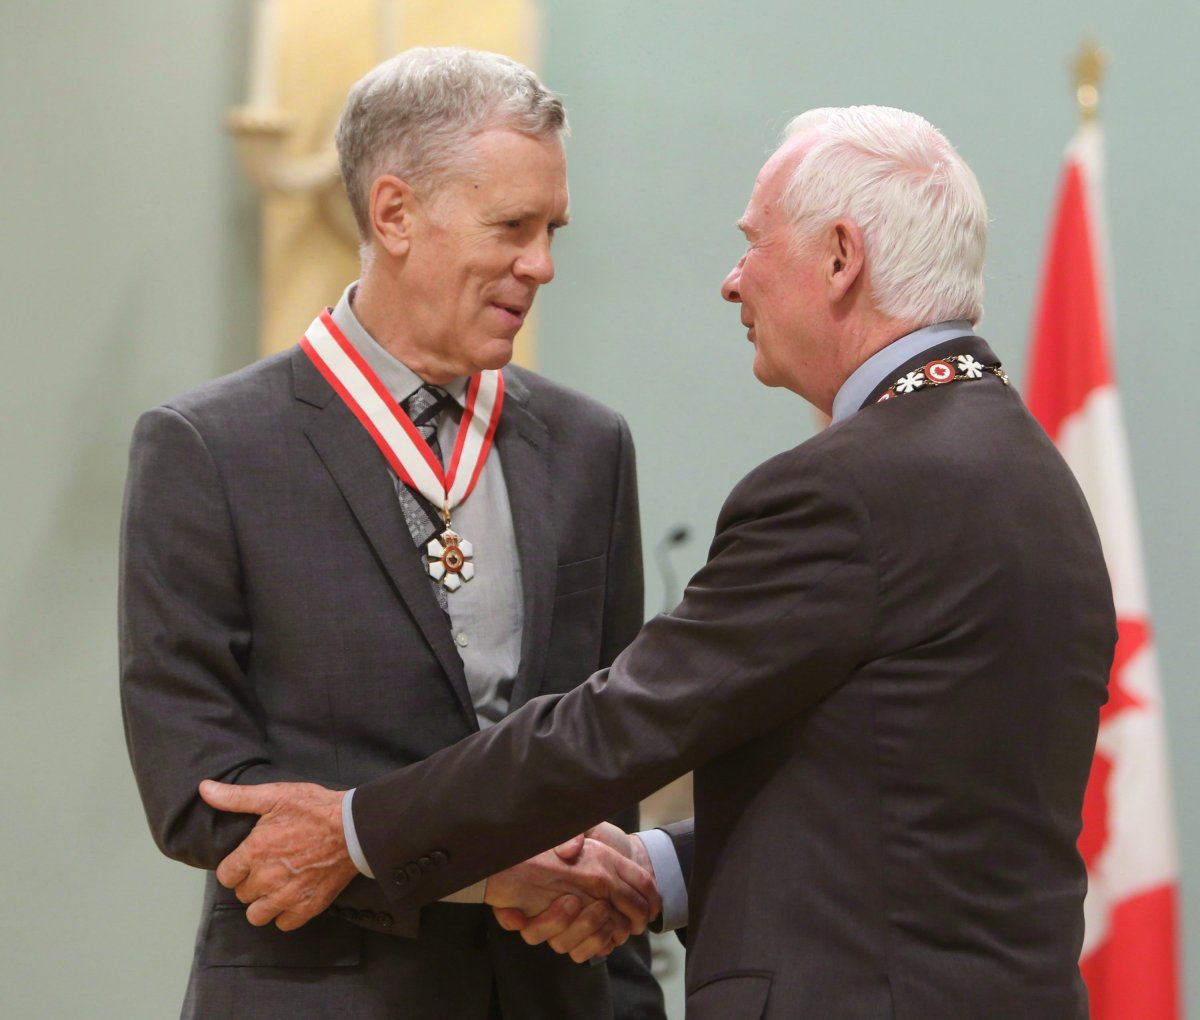 Author and humourist Stuart McLean is presented with the Officer of the Order of Canada medal by Governor General David Johnston in Ottawa on Friday, September 28, 2012. The Vinyl Cafe" writer and host Stuart McLean is suspending his popular radio show to focus on his cancer treatment.